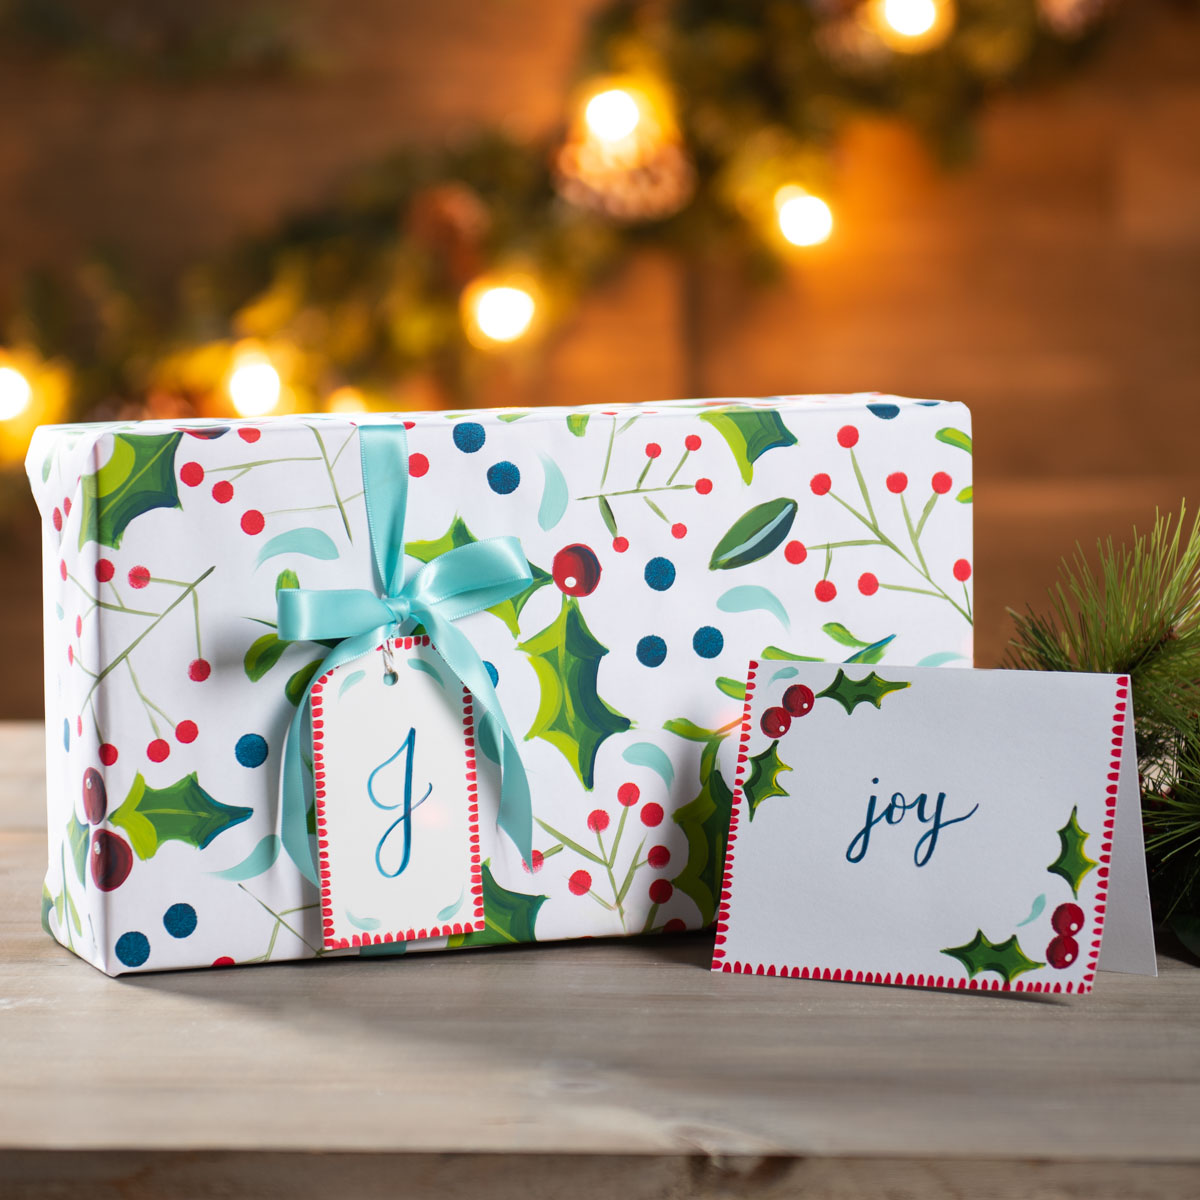 Let's Paint Hand Painted Gift Wrap - Project | Plaid Online